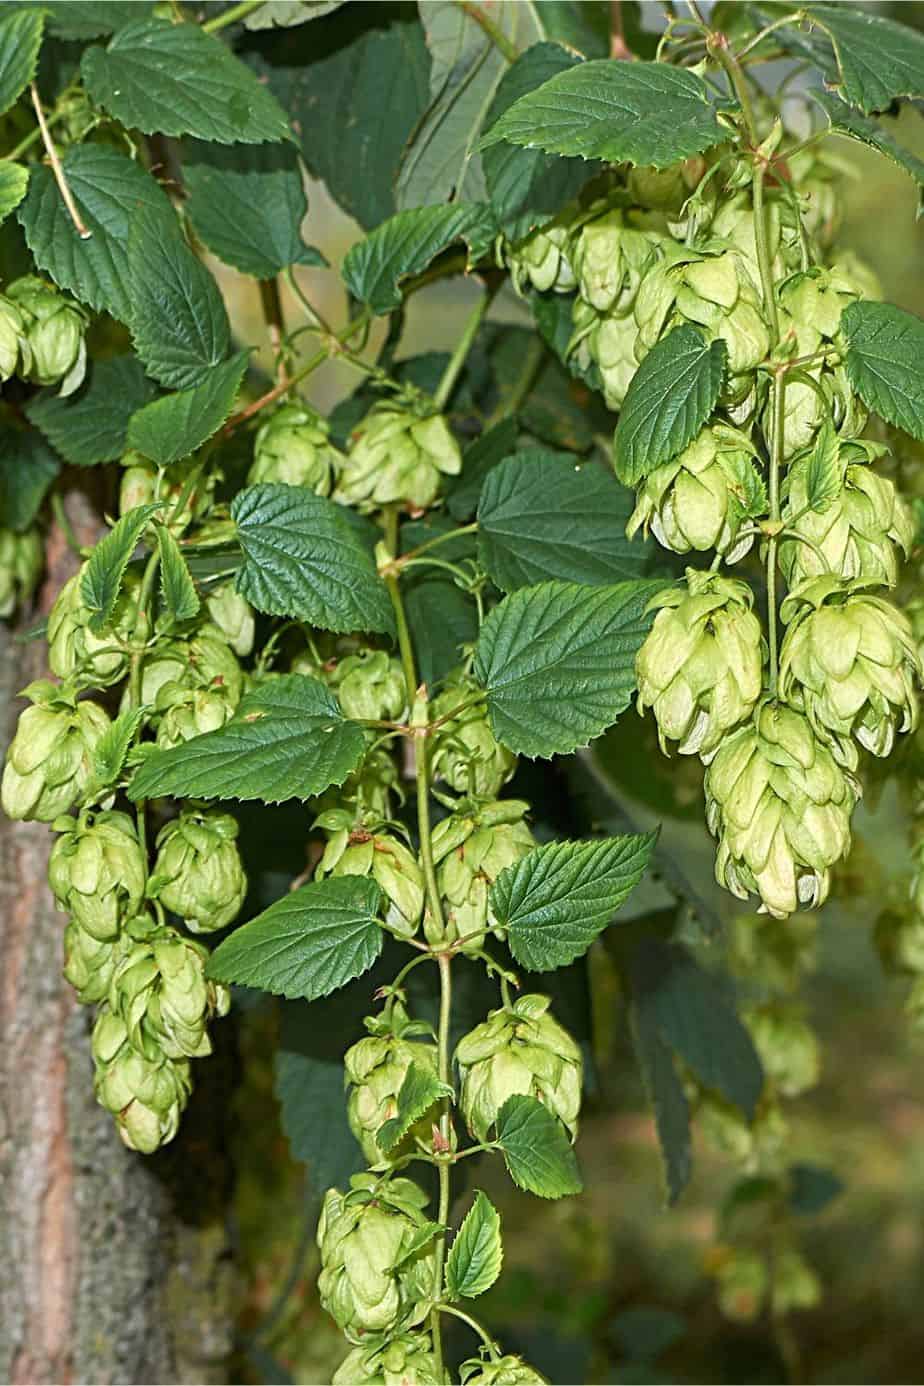 Though Hops can be quite tricky to grow, you can plant it in your garden for privacy